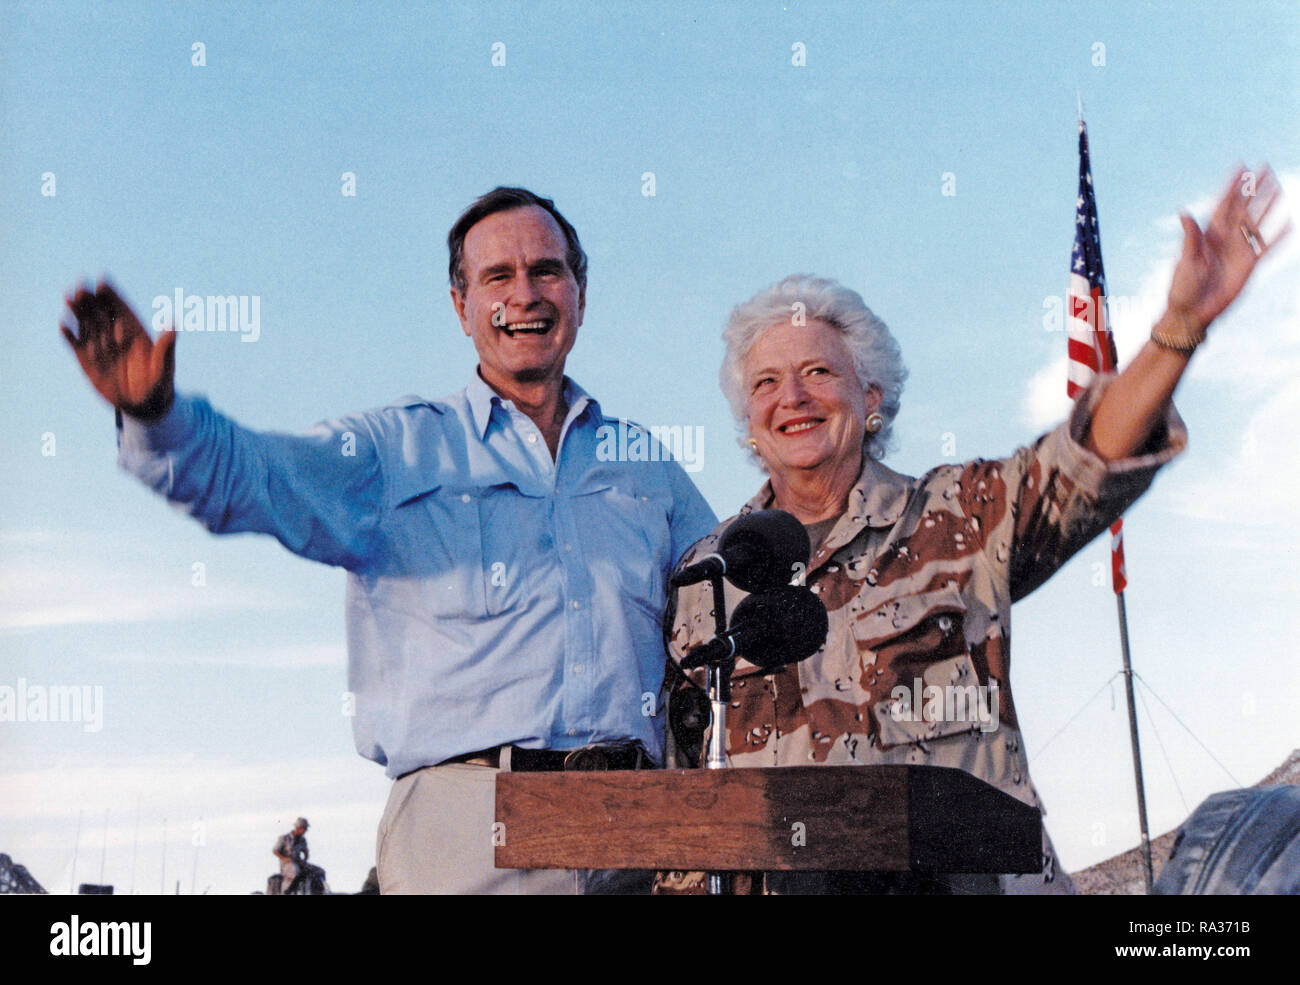 Saudi Arabia. 22nd Jan, 1990. President GEORGE H.W. BUSH and first lady BARBARA BUSH visit US military personnel on Thanksgiving in Saudi Arabia. Credit: Ed Bailey/DOD/CNP/ZUMA Wire/Alamy Live News Stock Photo